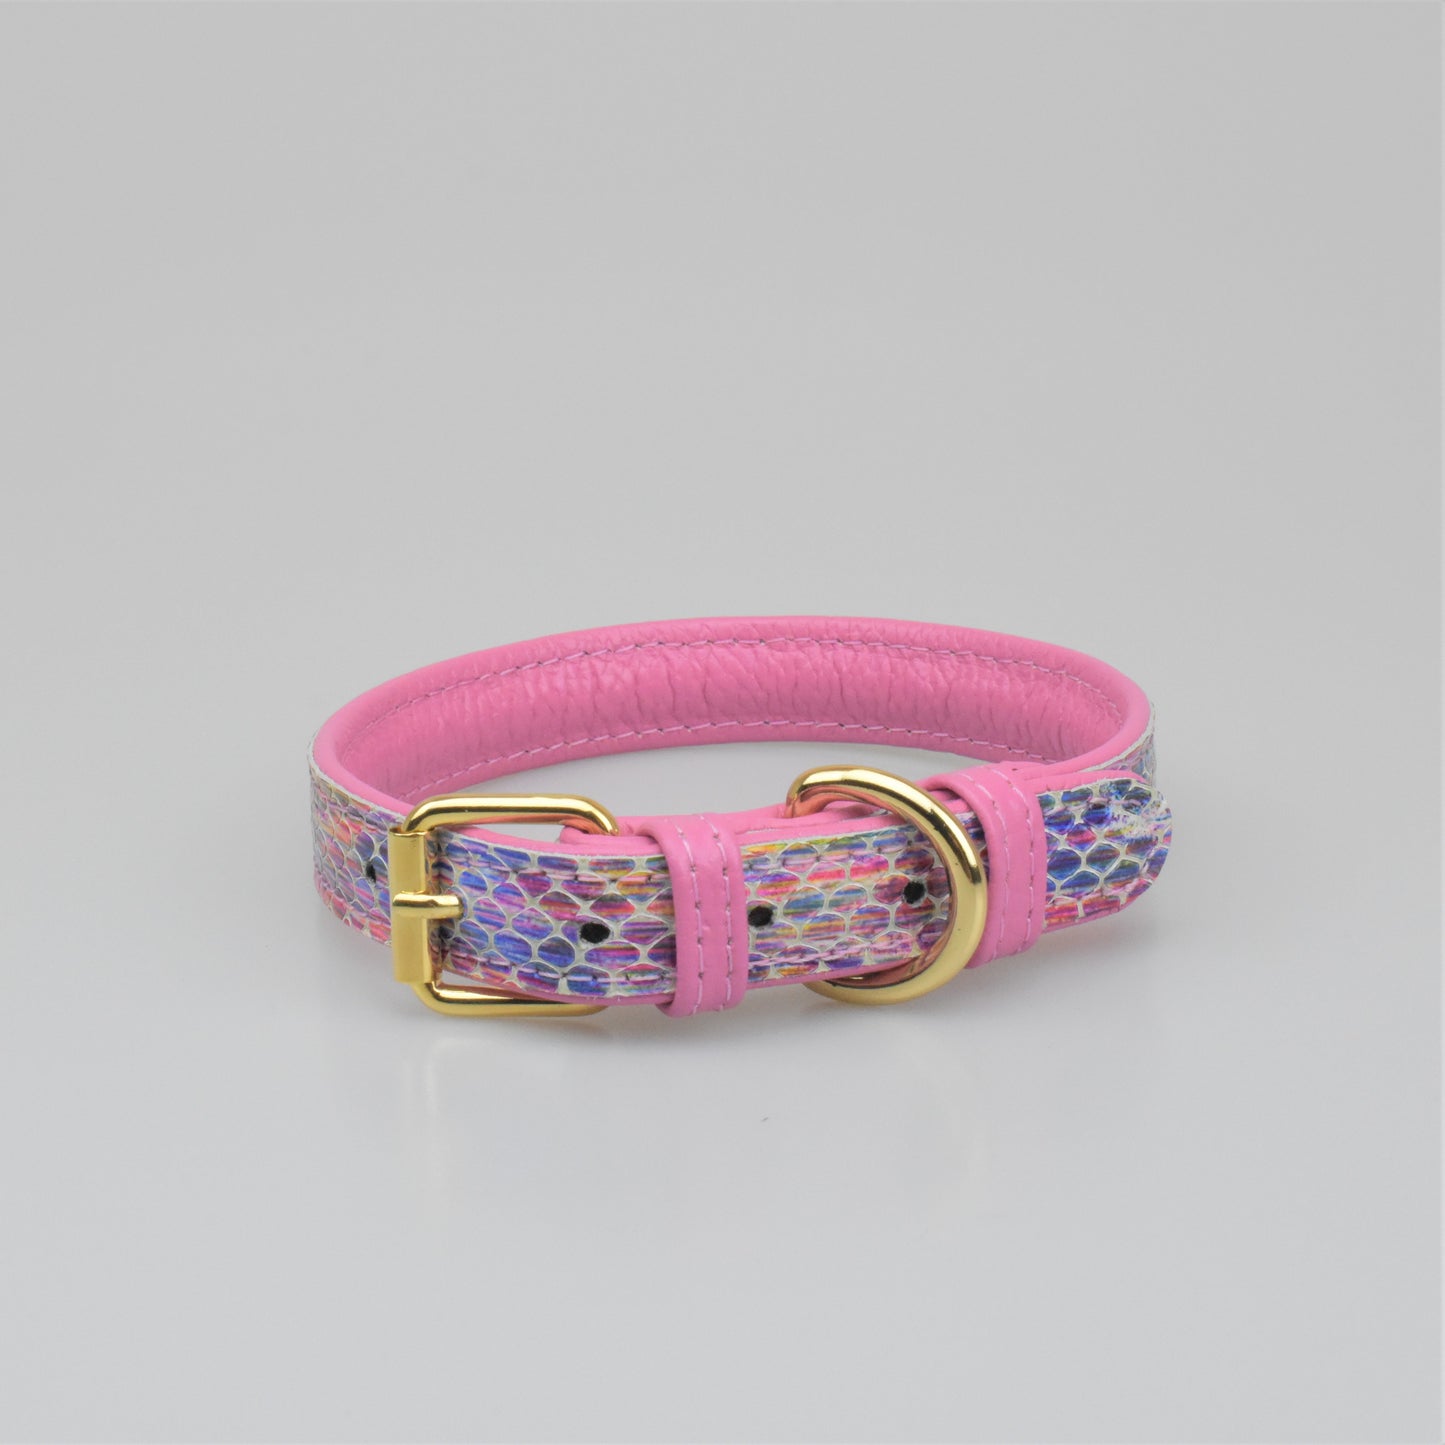 Willow Walks leather collar in multi snake and hot pink